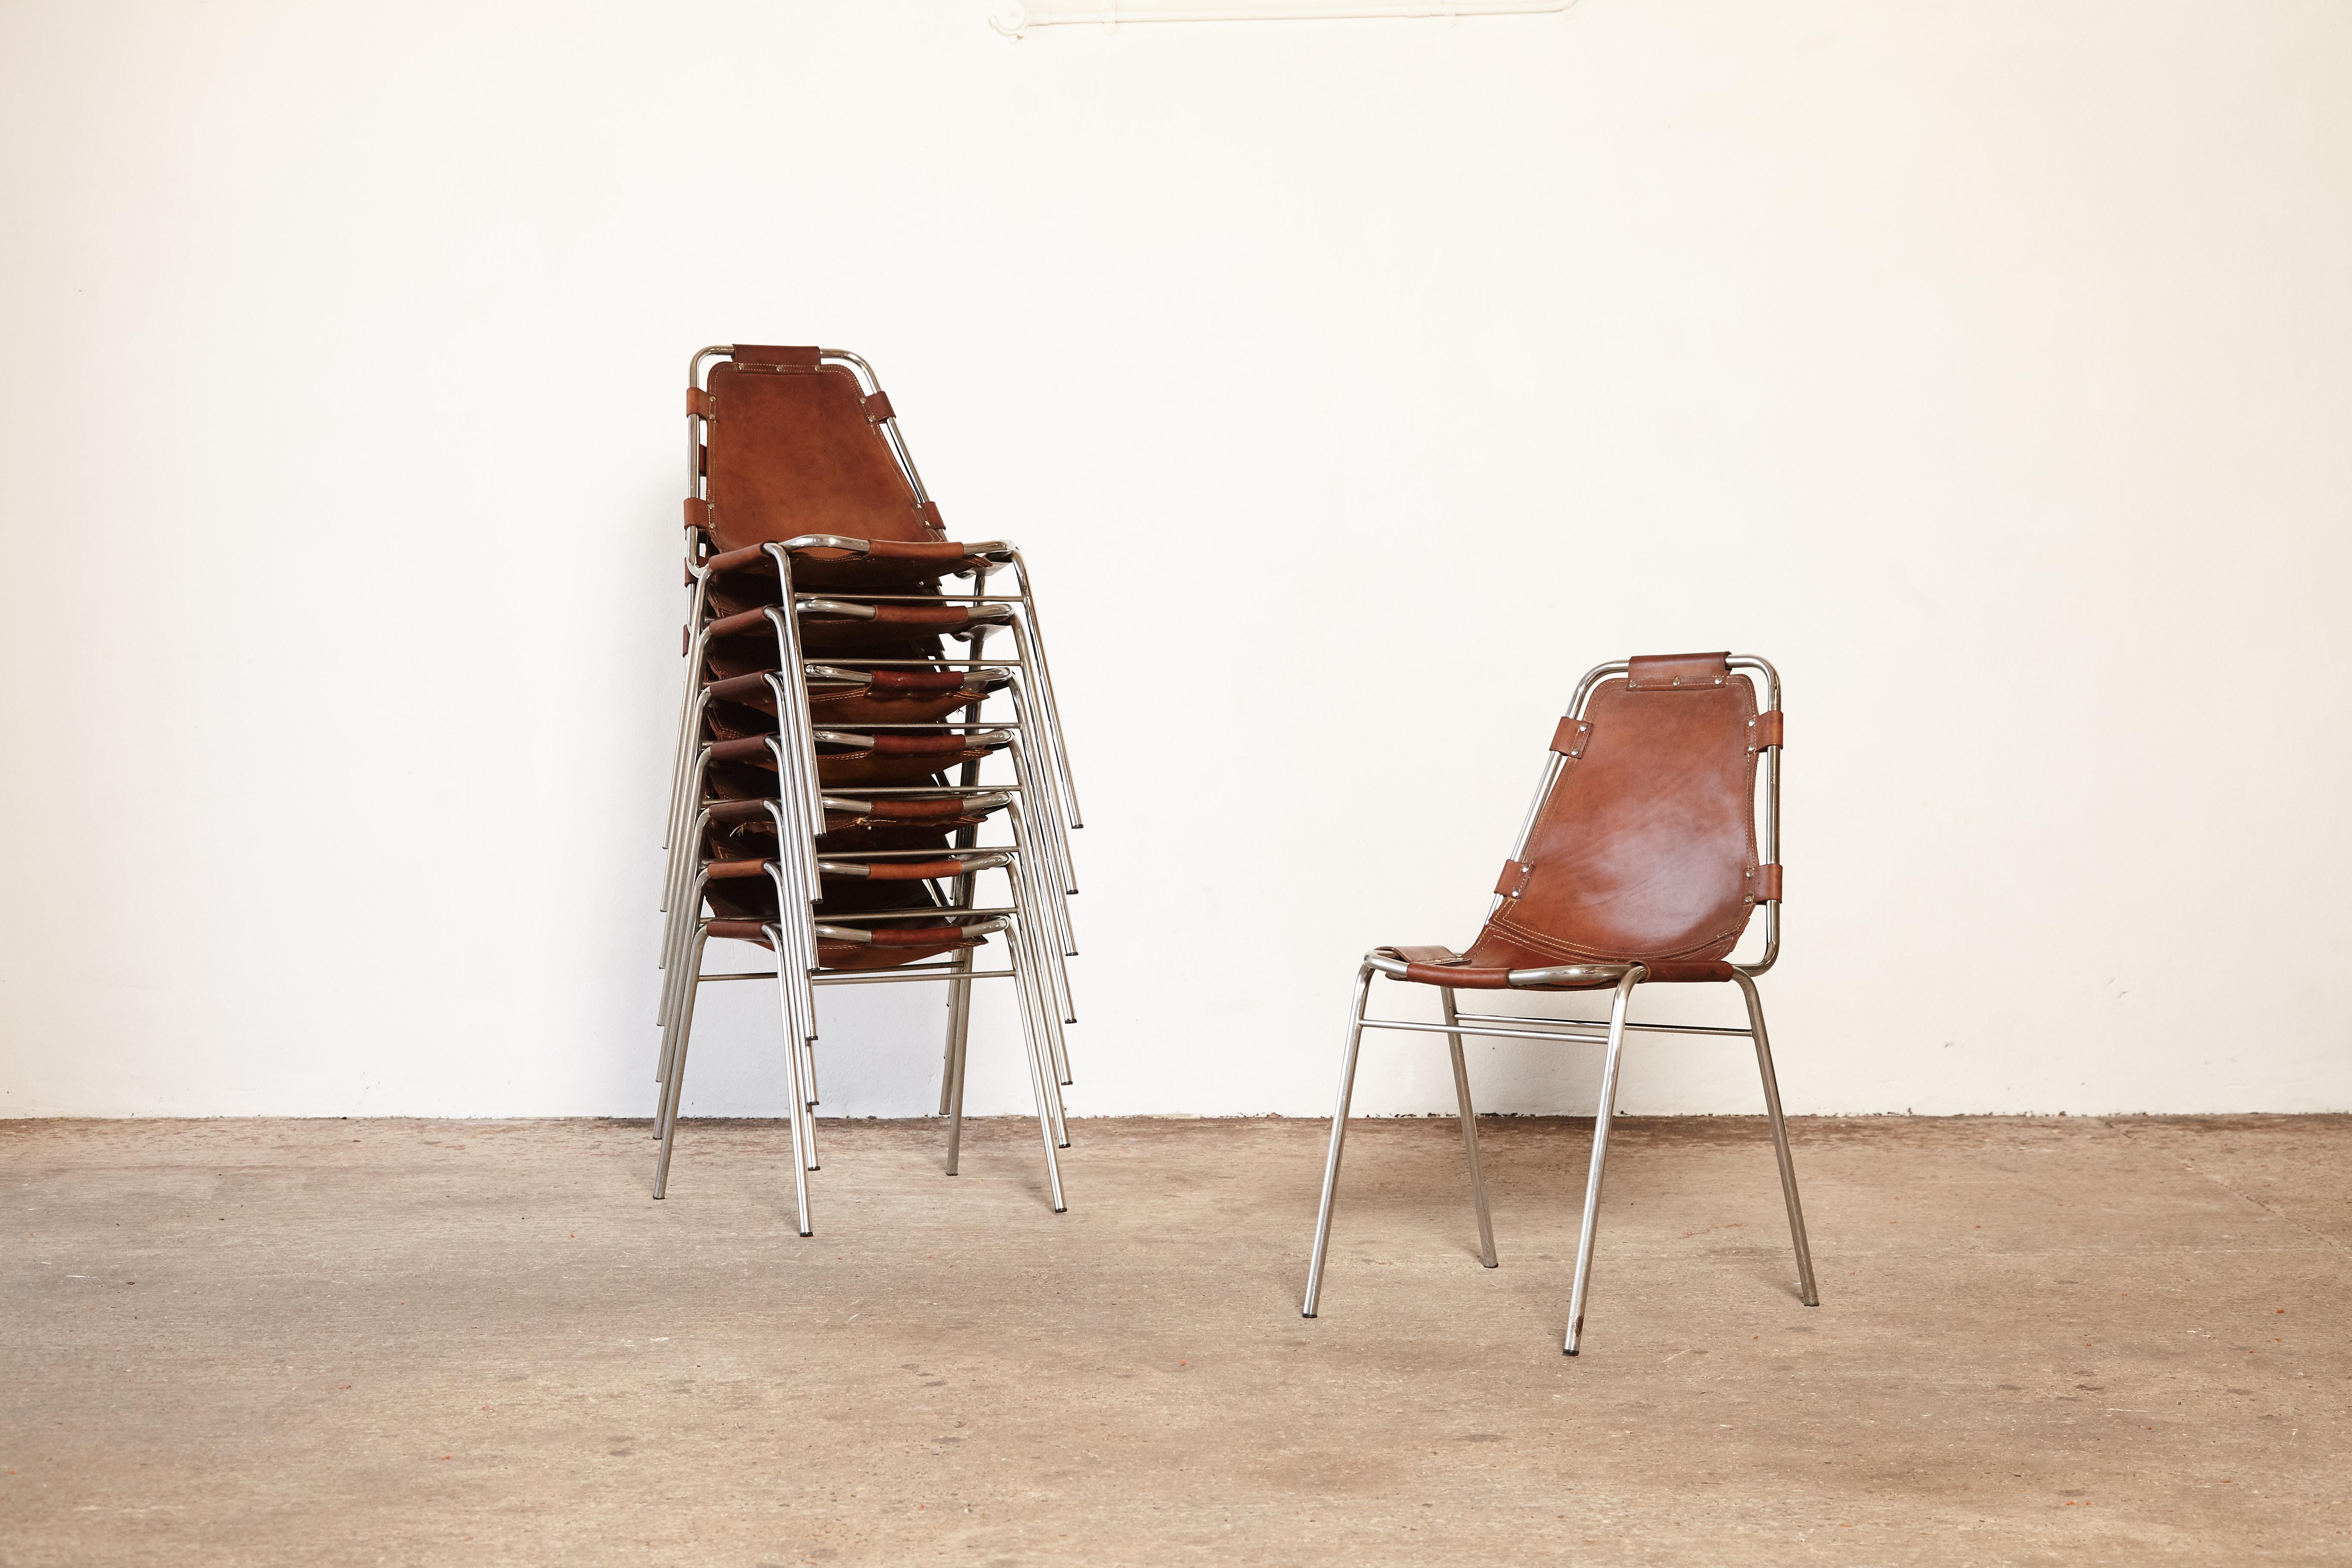 Set of 8 'Les Arcs' chairs in tubular steel and cognac leather, France / Italy, 1970s. Patinated original leather.

Les Arcs was a project on which Charlotte Perriand collaborated with some other architects who developed the interiors as well. 